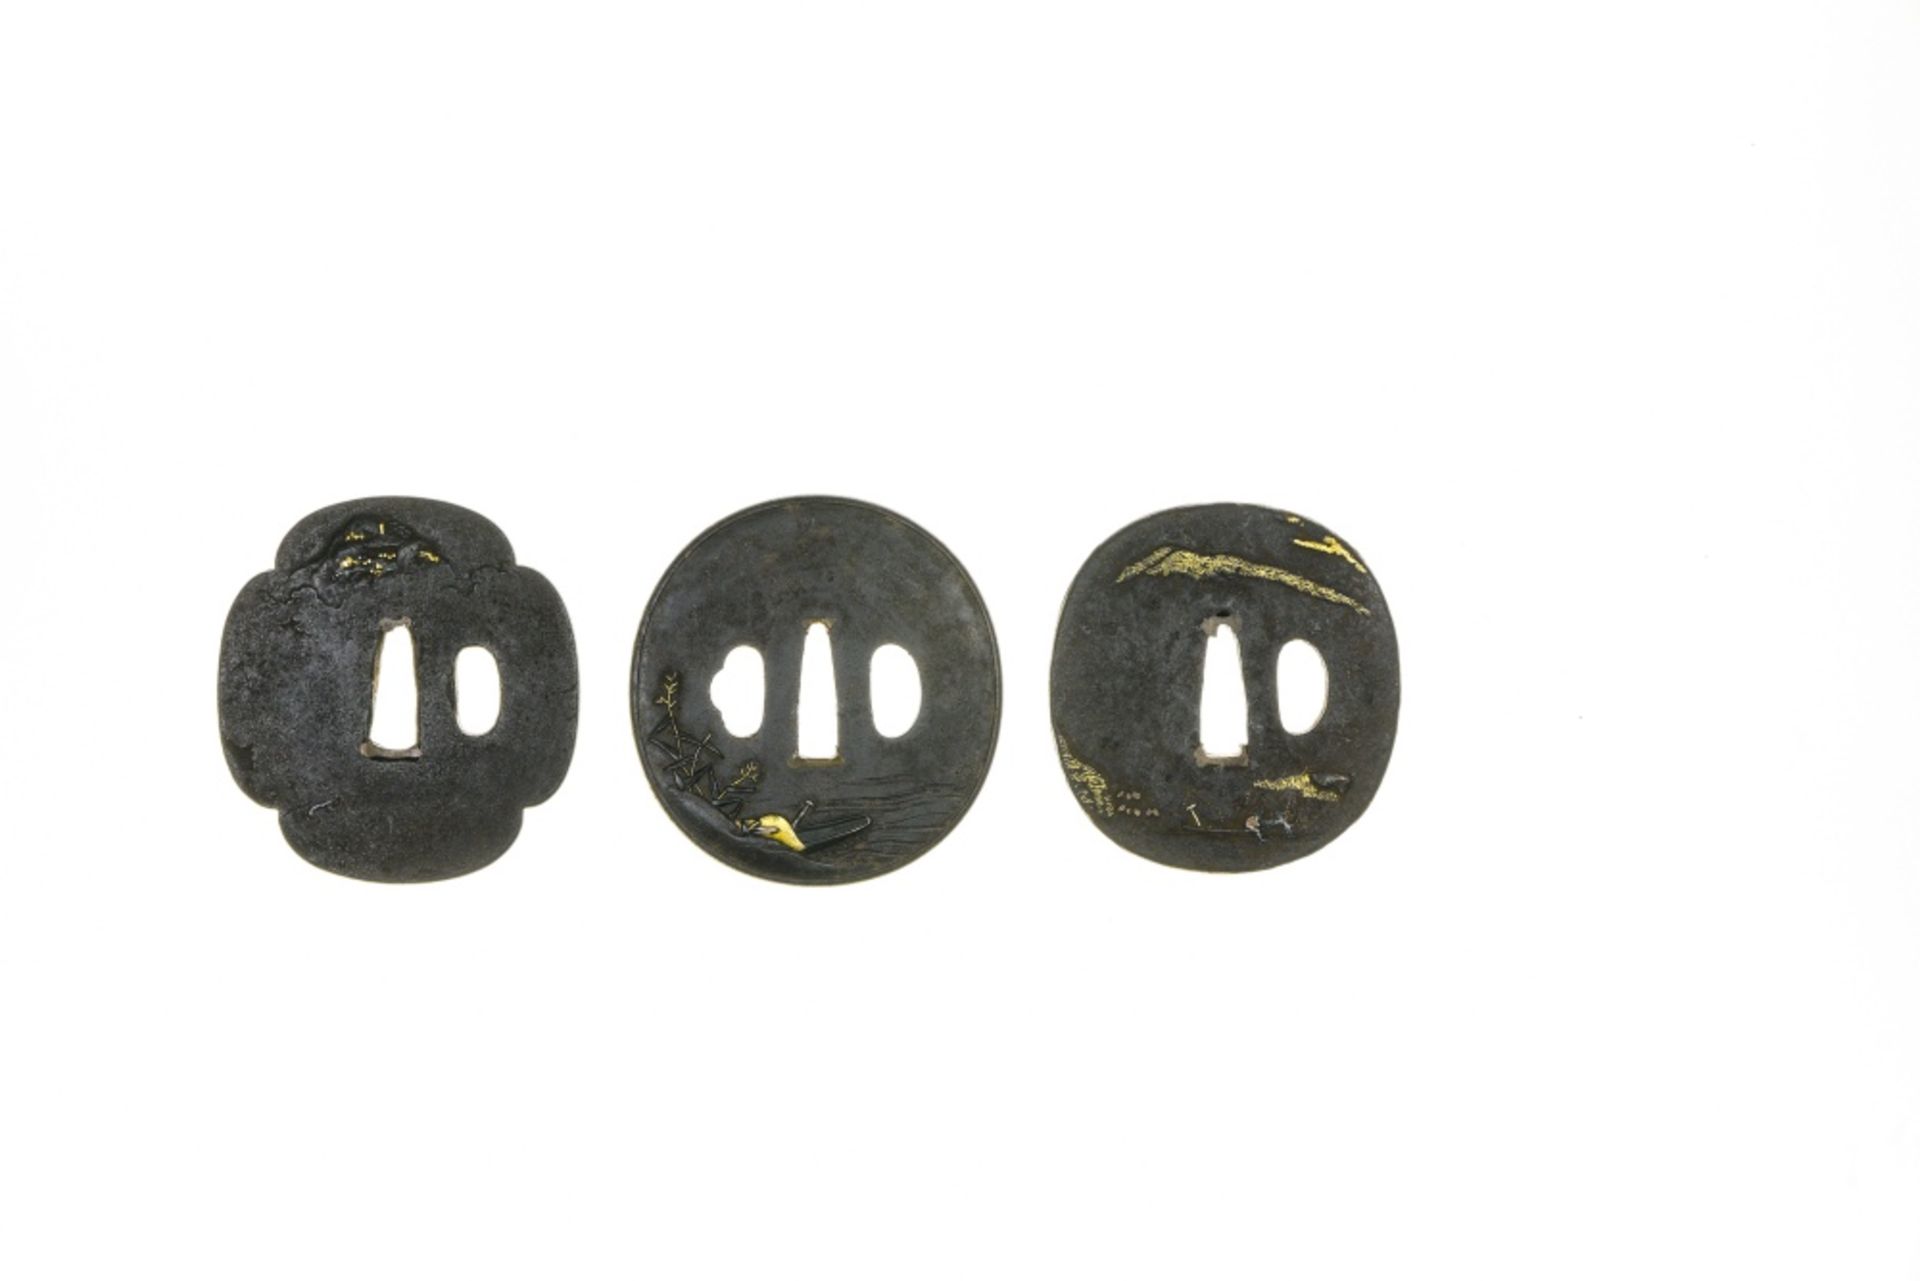 Japan, Edo Three tsubas, Iron, gilded in some spots, depicting a couple, ducks, and a lake and - Image 2 of 2